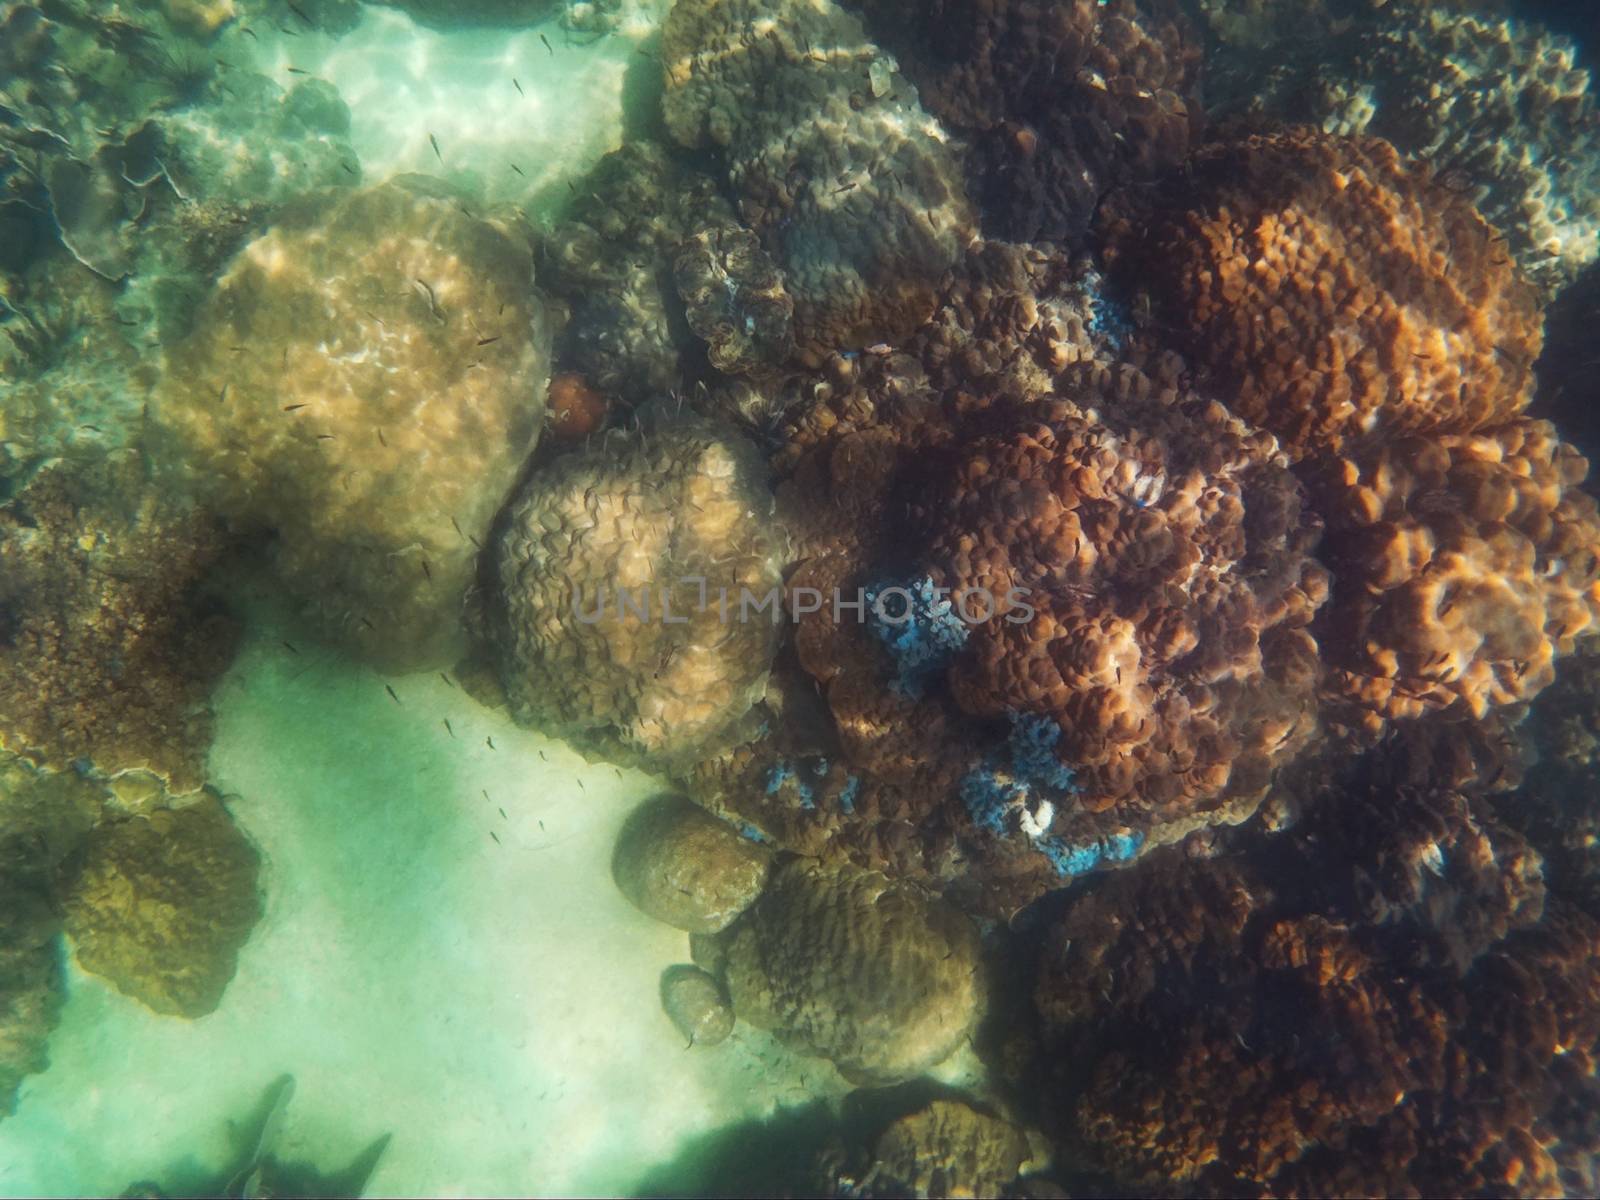 snorkeling in the andaman sea, Thailand by ideation90